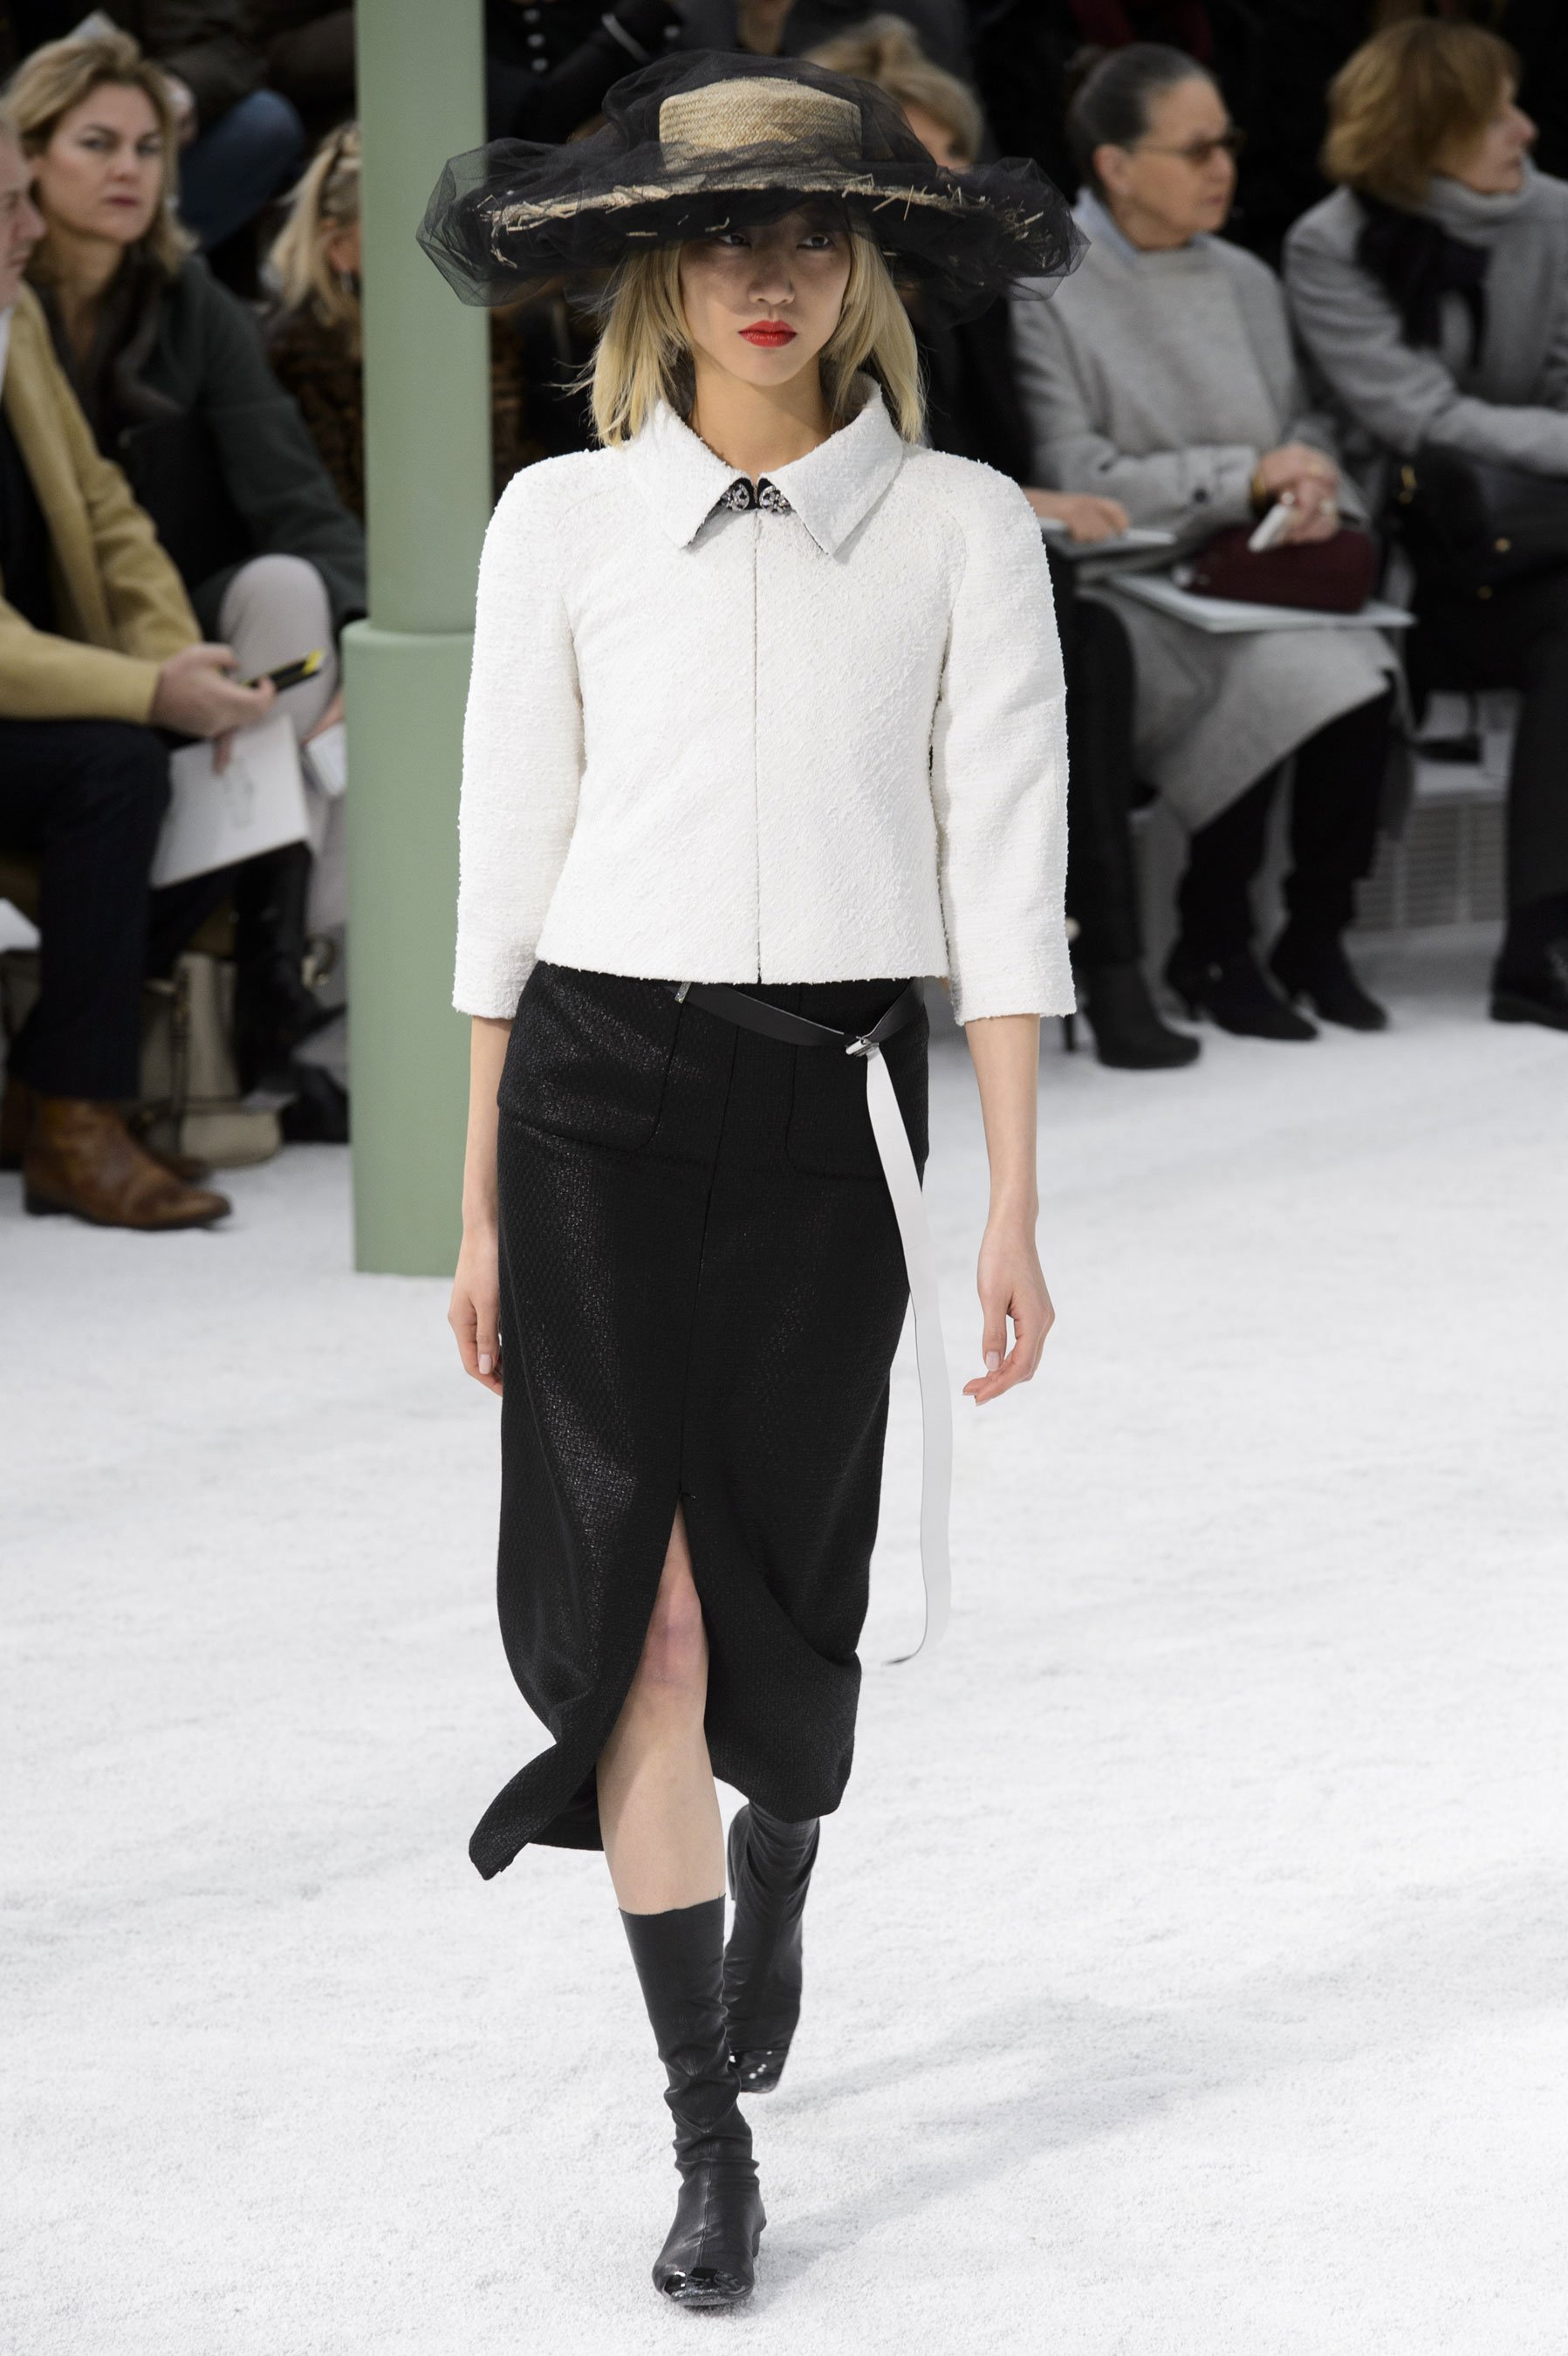 chanel haute couture spring 2015 pfw 13 soo